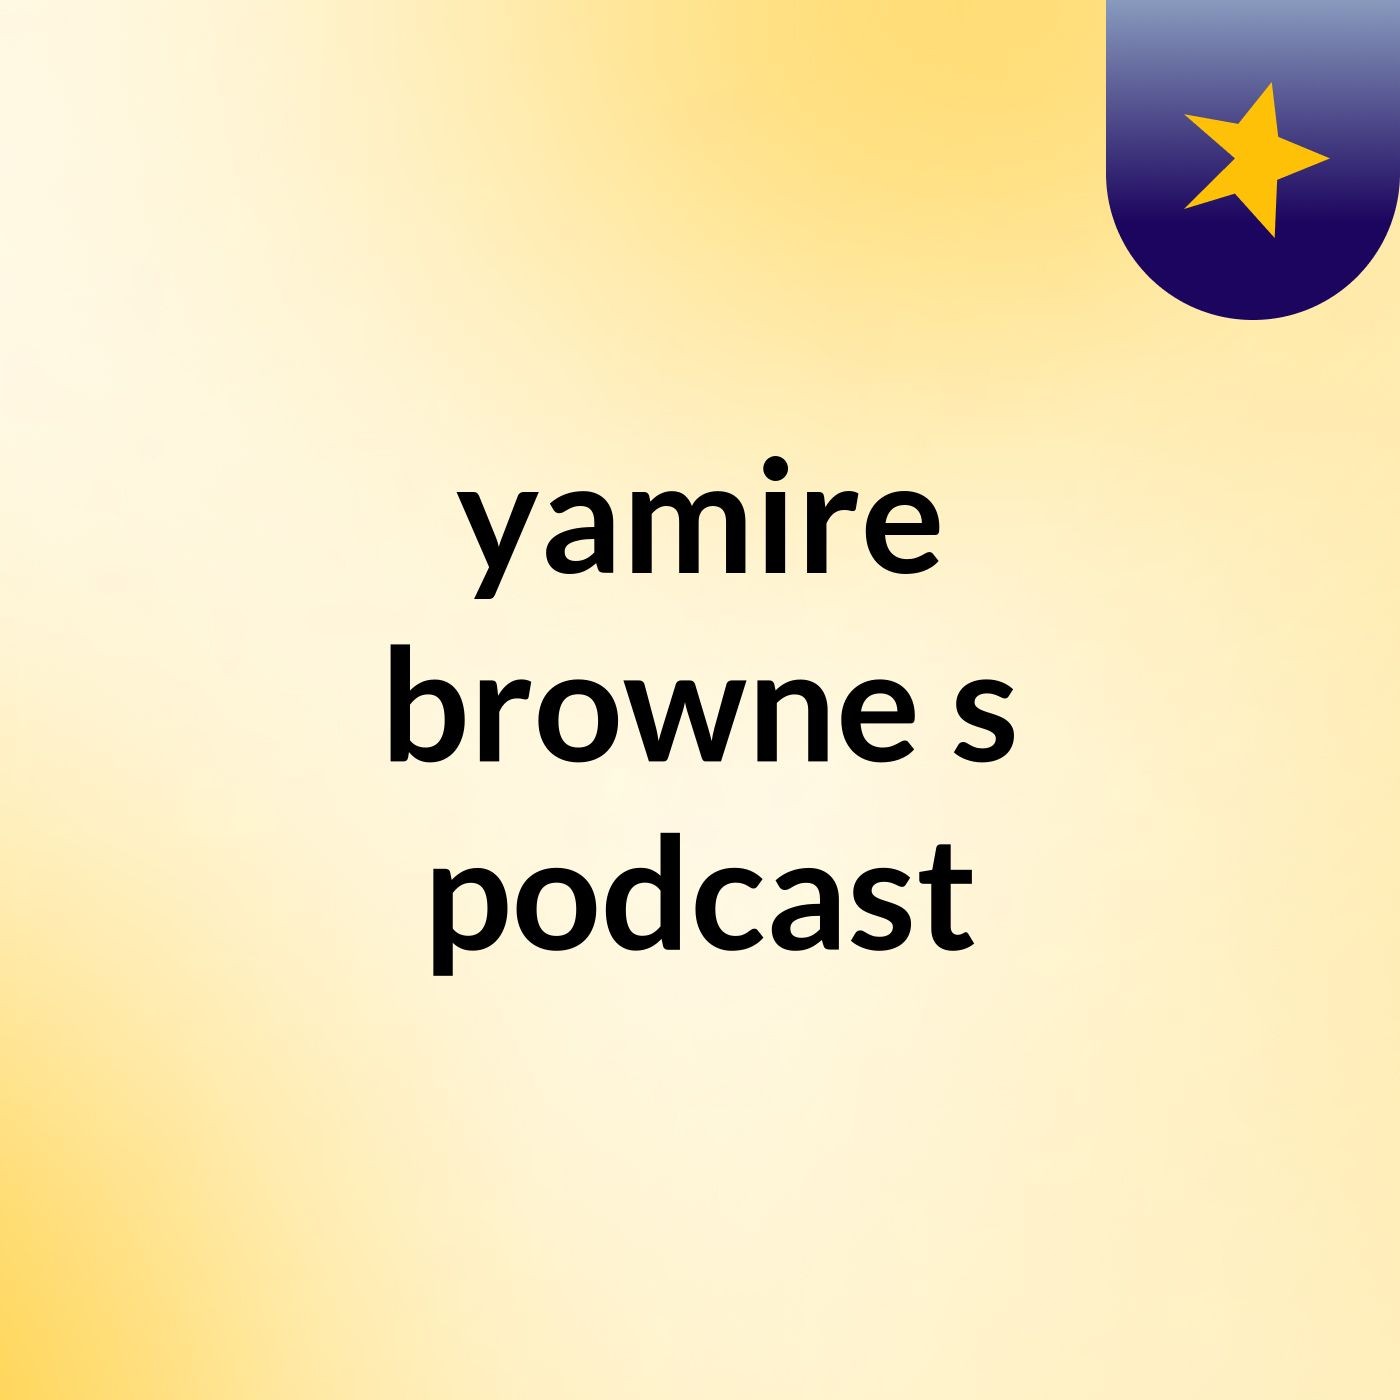 Episode 2 - yamire browne's podcast